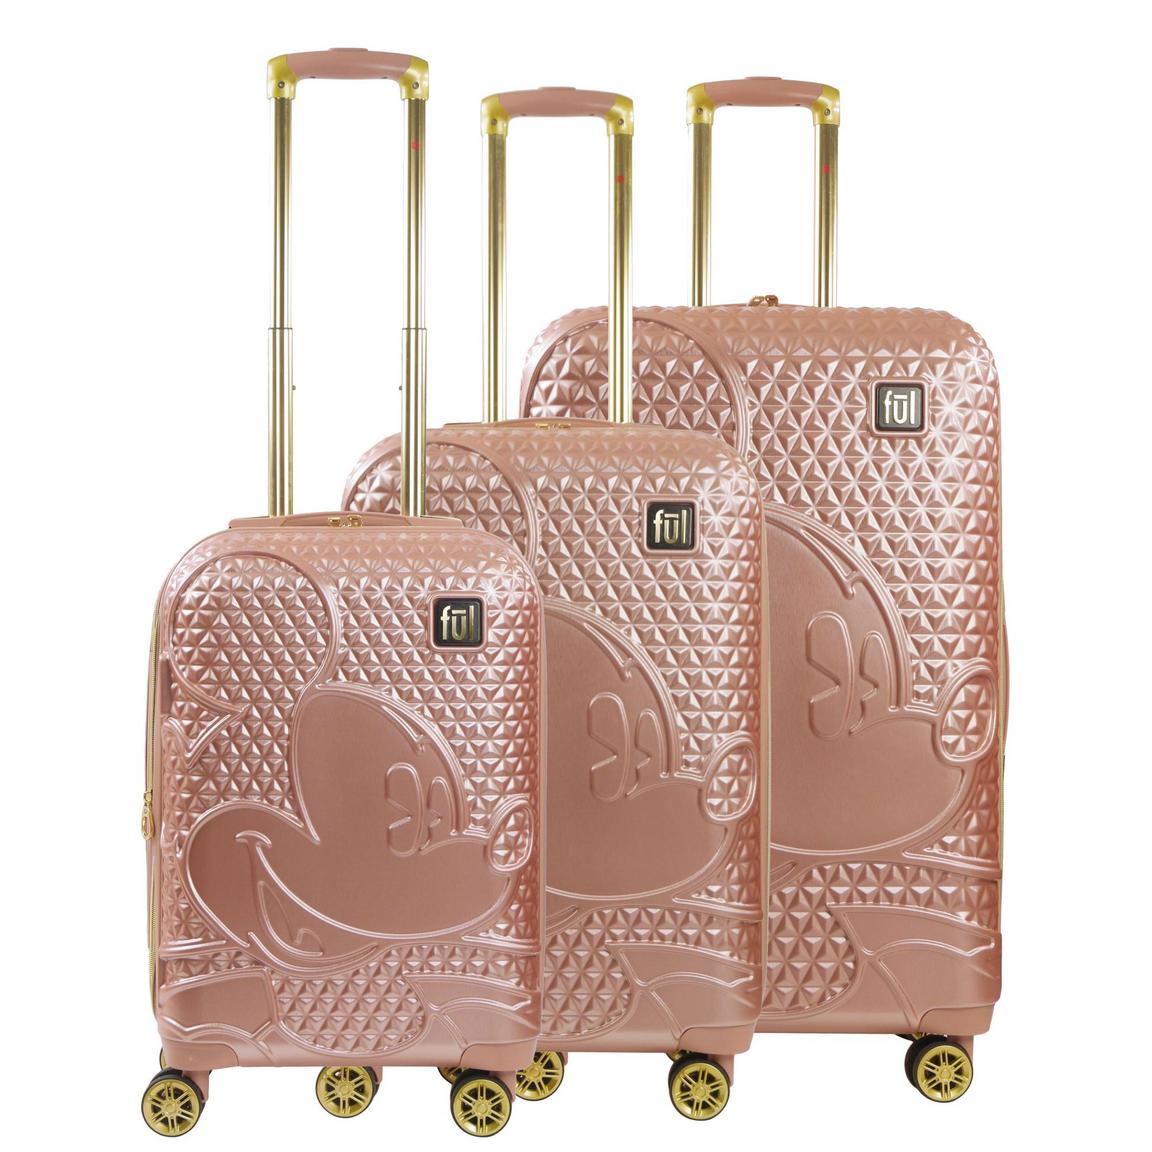 Concept One FUL Disney Textured Mickey Mouse Hard Sided Luggage 3-Piece Set - Rose Gold, Rosegold